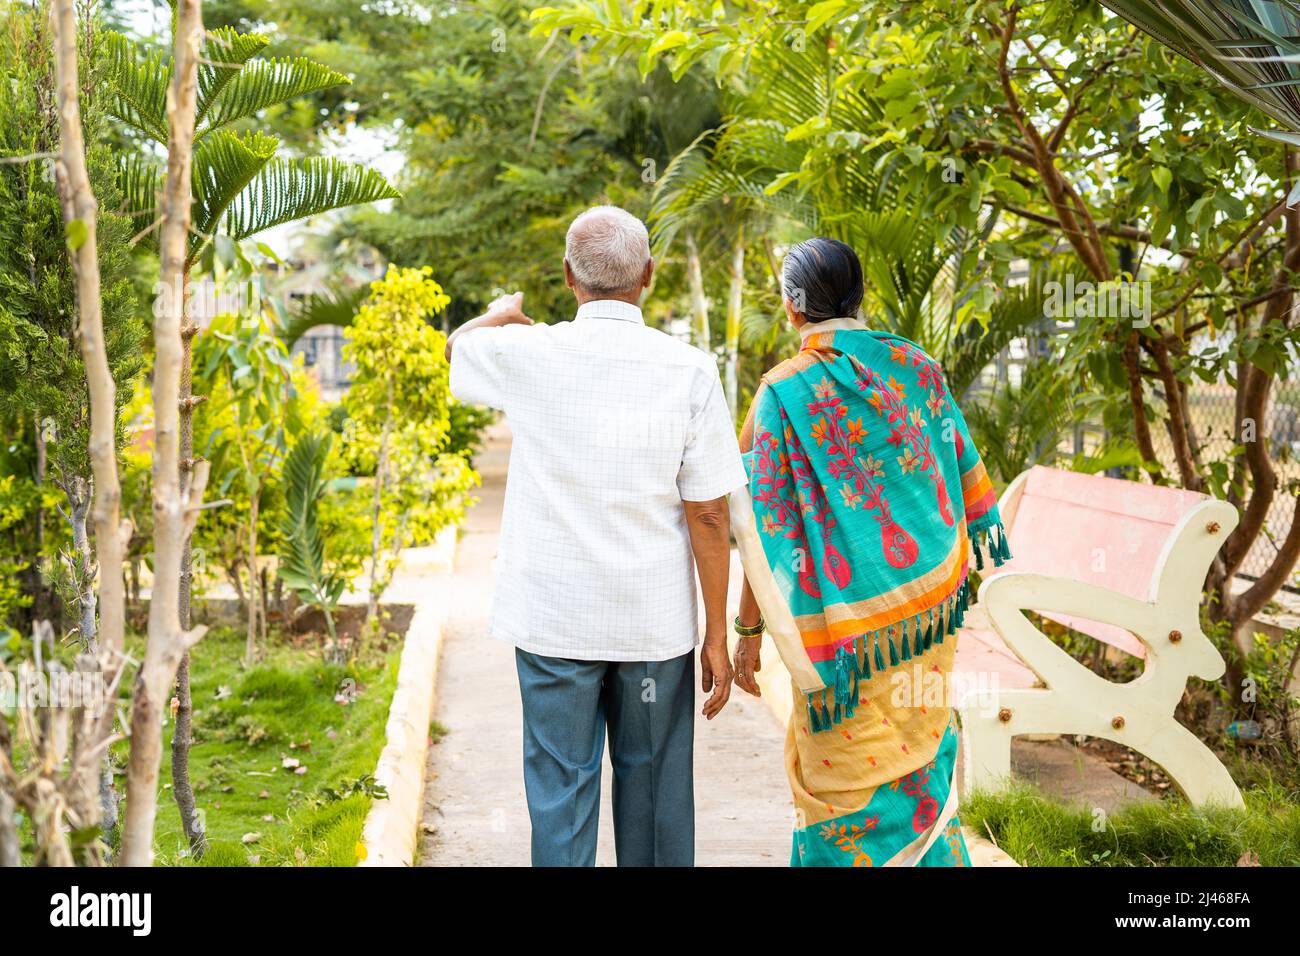 Back view shot of senior couples during morning walk at garden - conept of bonding, relationship and healthy relaxed lifestyle Stock Photo